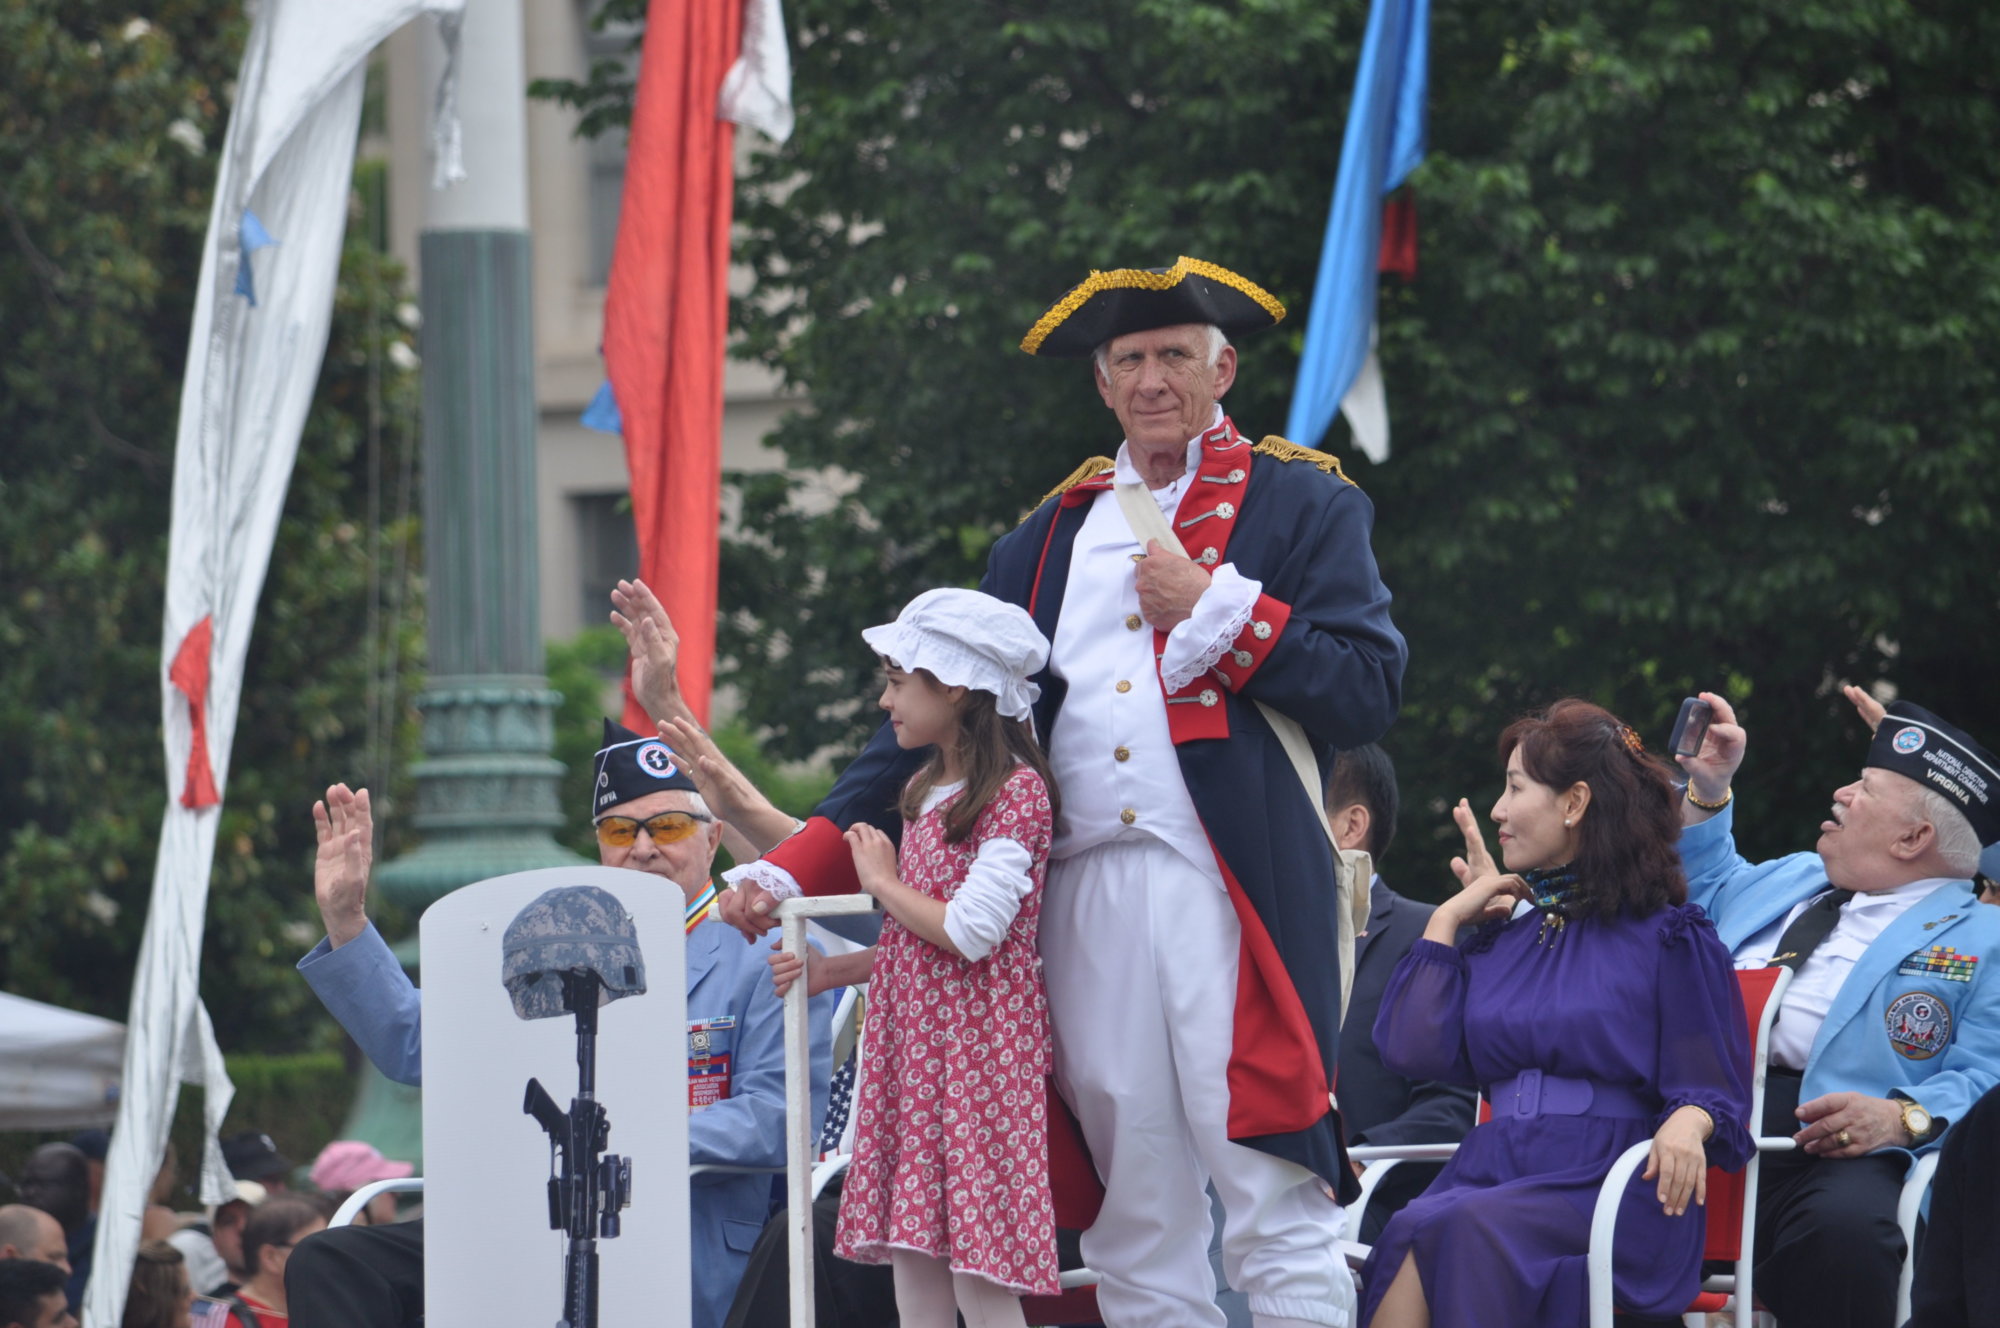 The annual National Memorial Day Parade took place along Constitution Avenue on Monday, May 28, 2018. (Monique Blyther/WTOP)